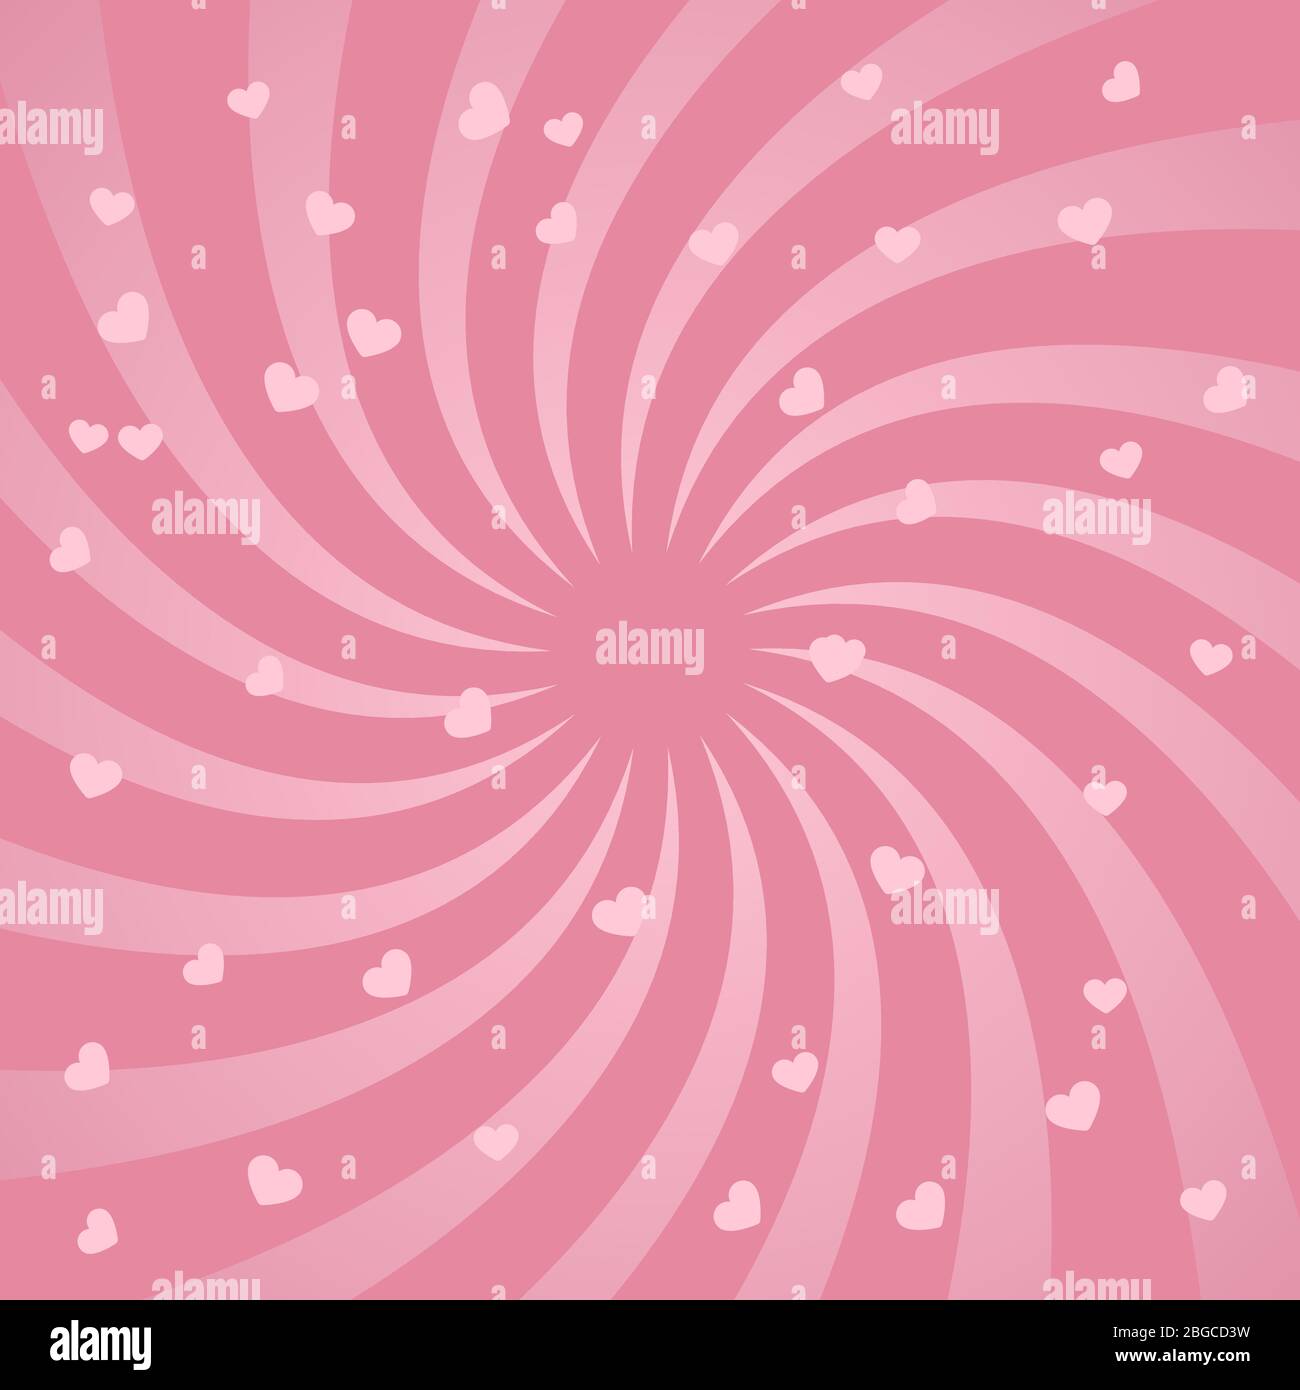 Bright spiral design background pink pattern with hearts. Vector illustration Stock Vector